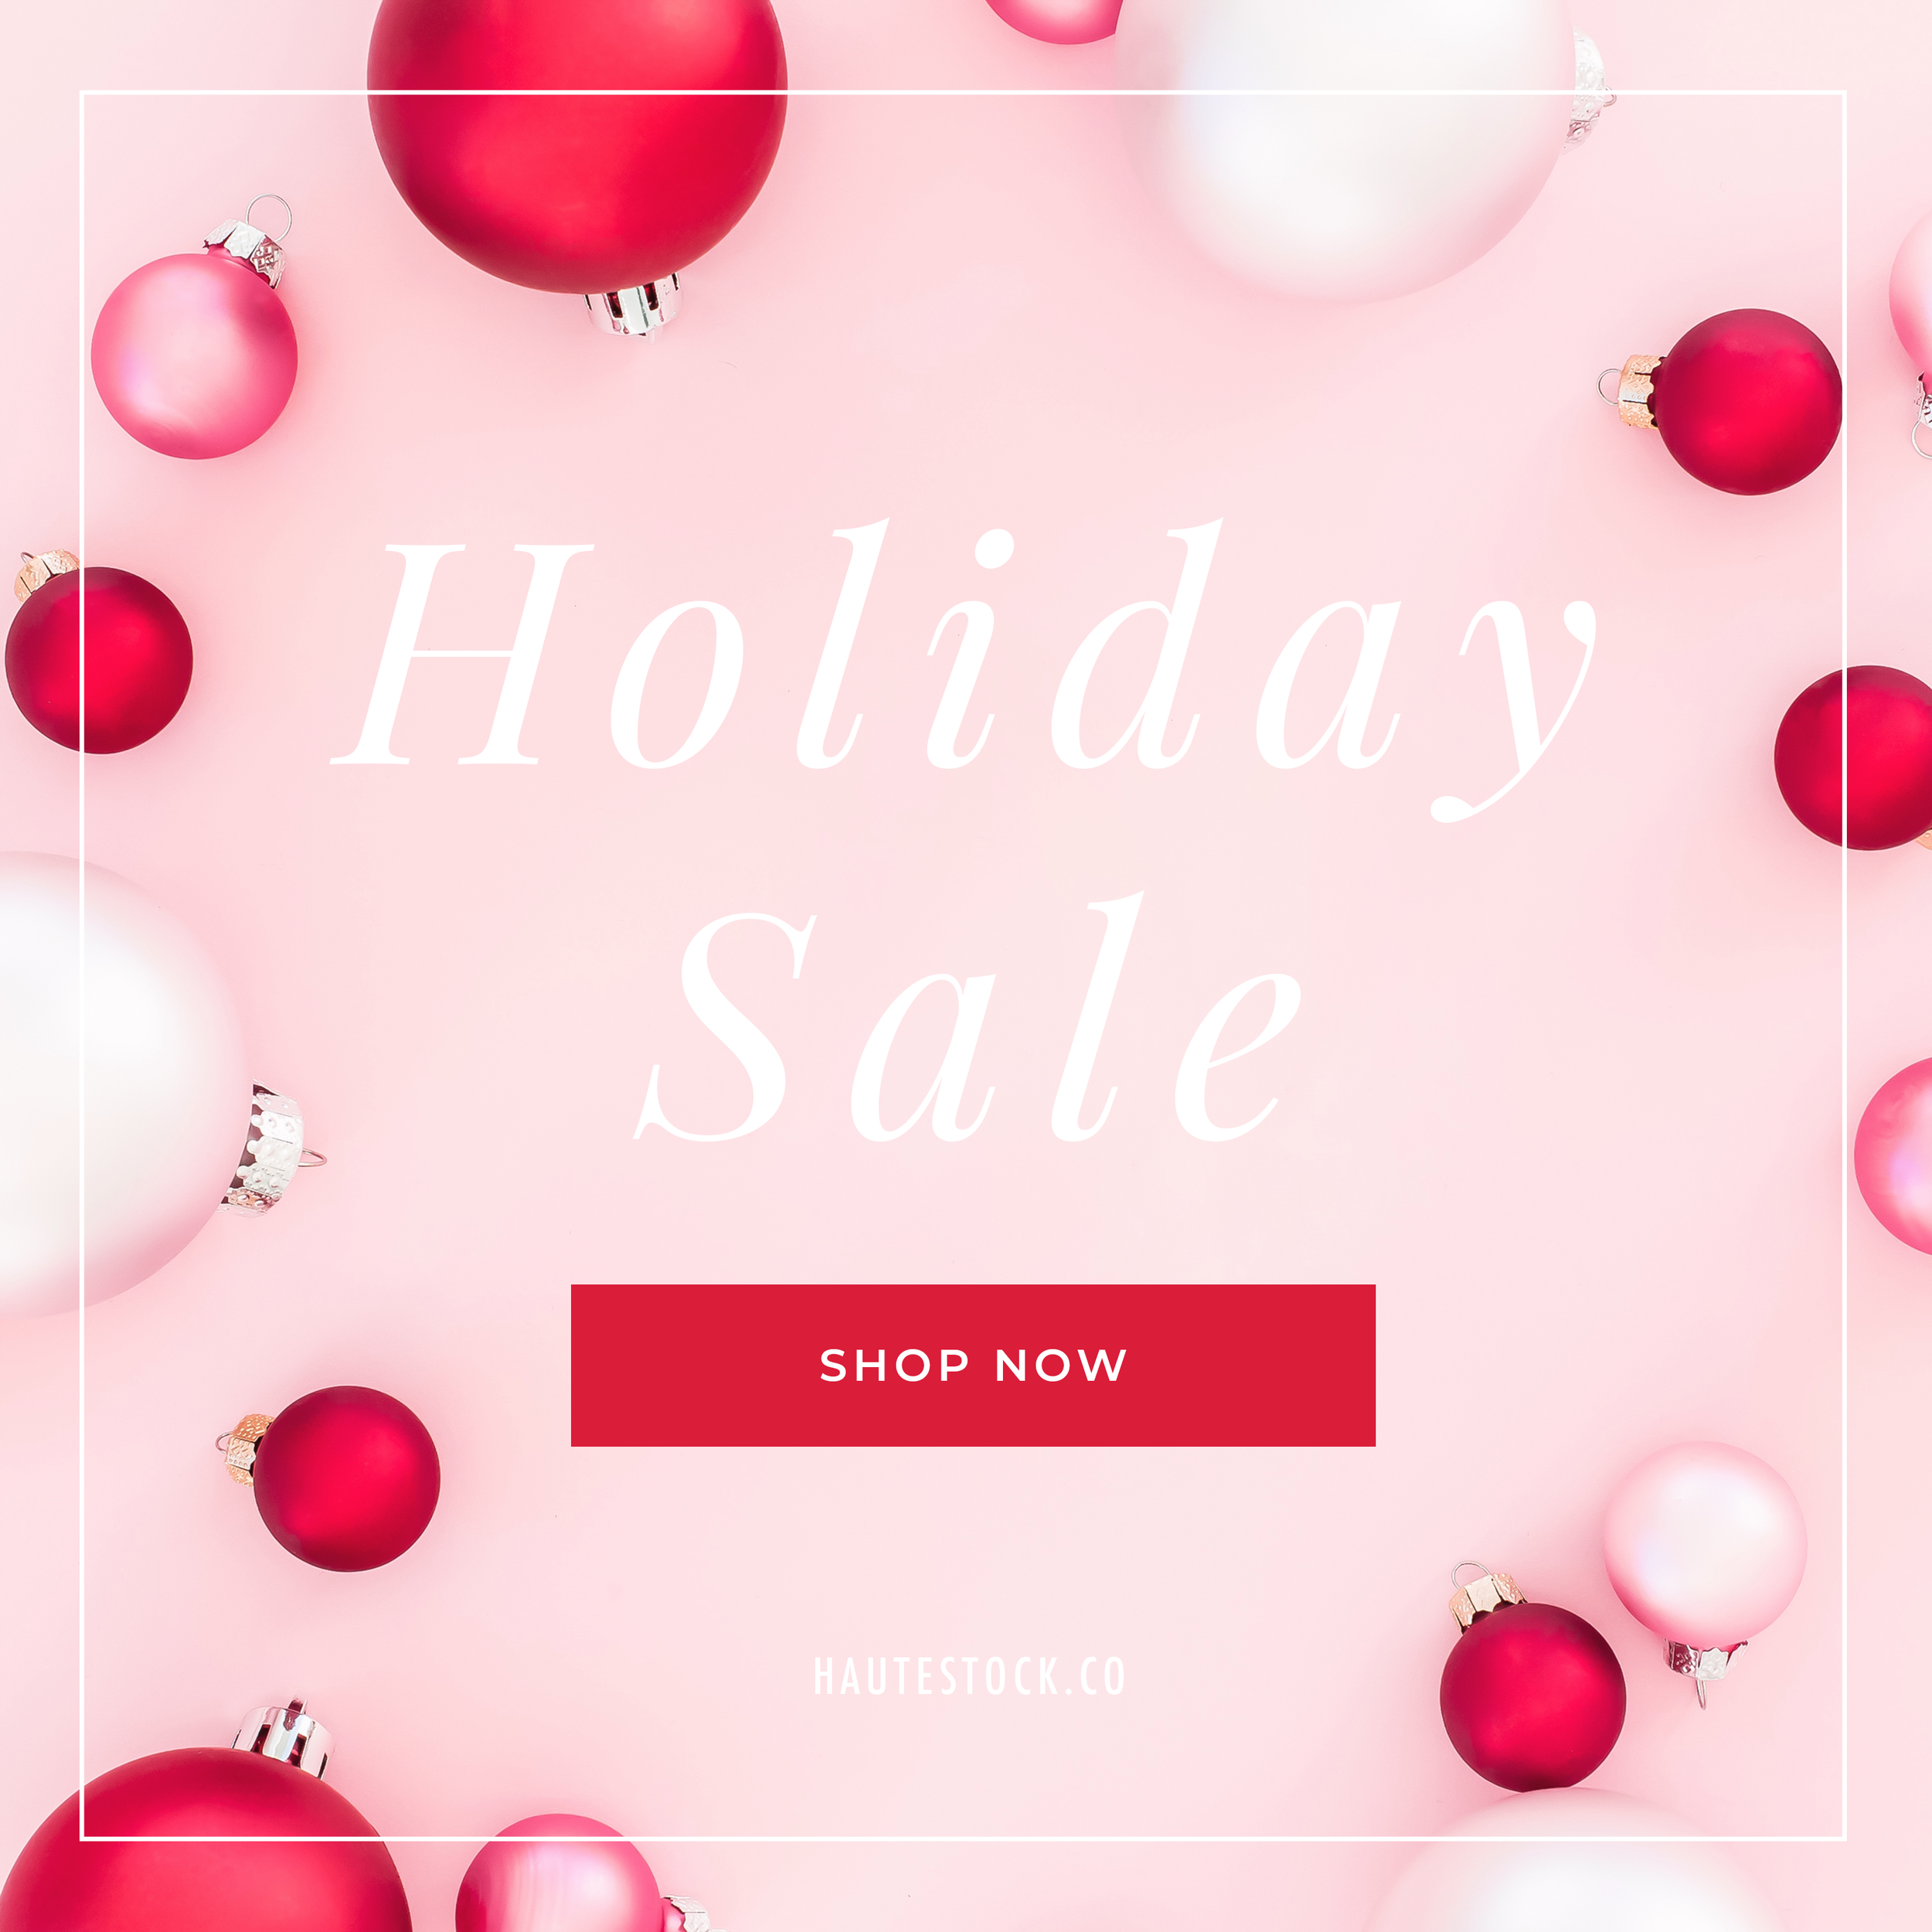 Looking to get your business ready for an upcoming big, holiday promotion? Pink & Red Holiday from Haute Stock offers beautiful styled stock photography for woman entrepreneurs.